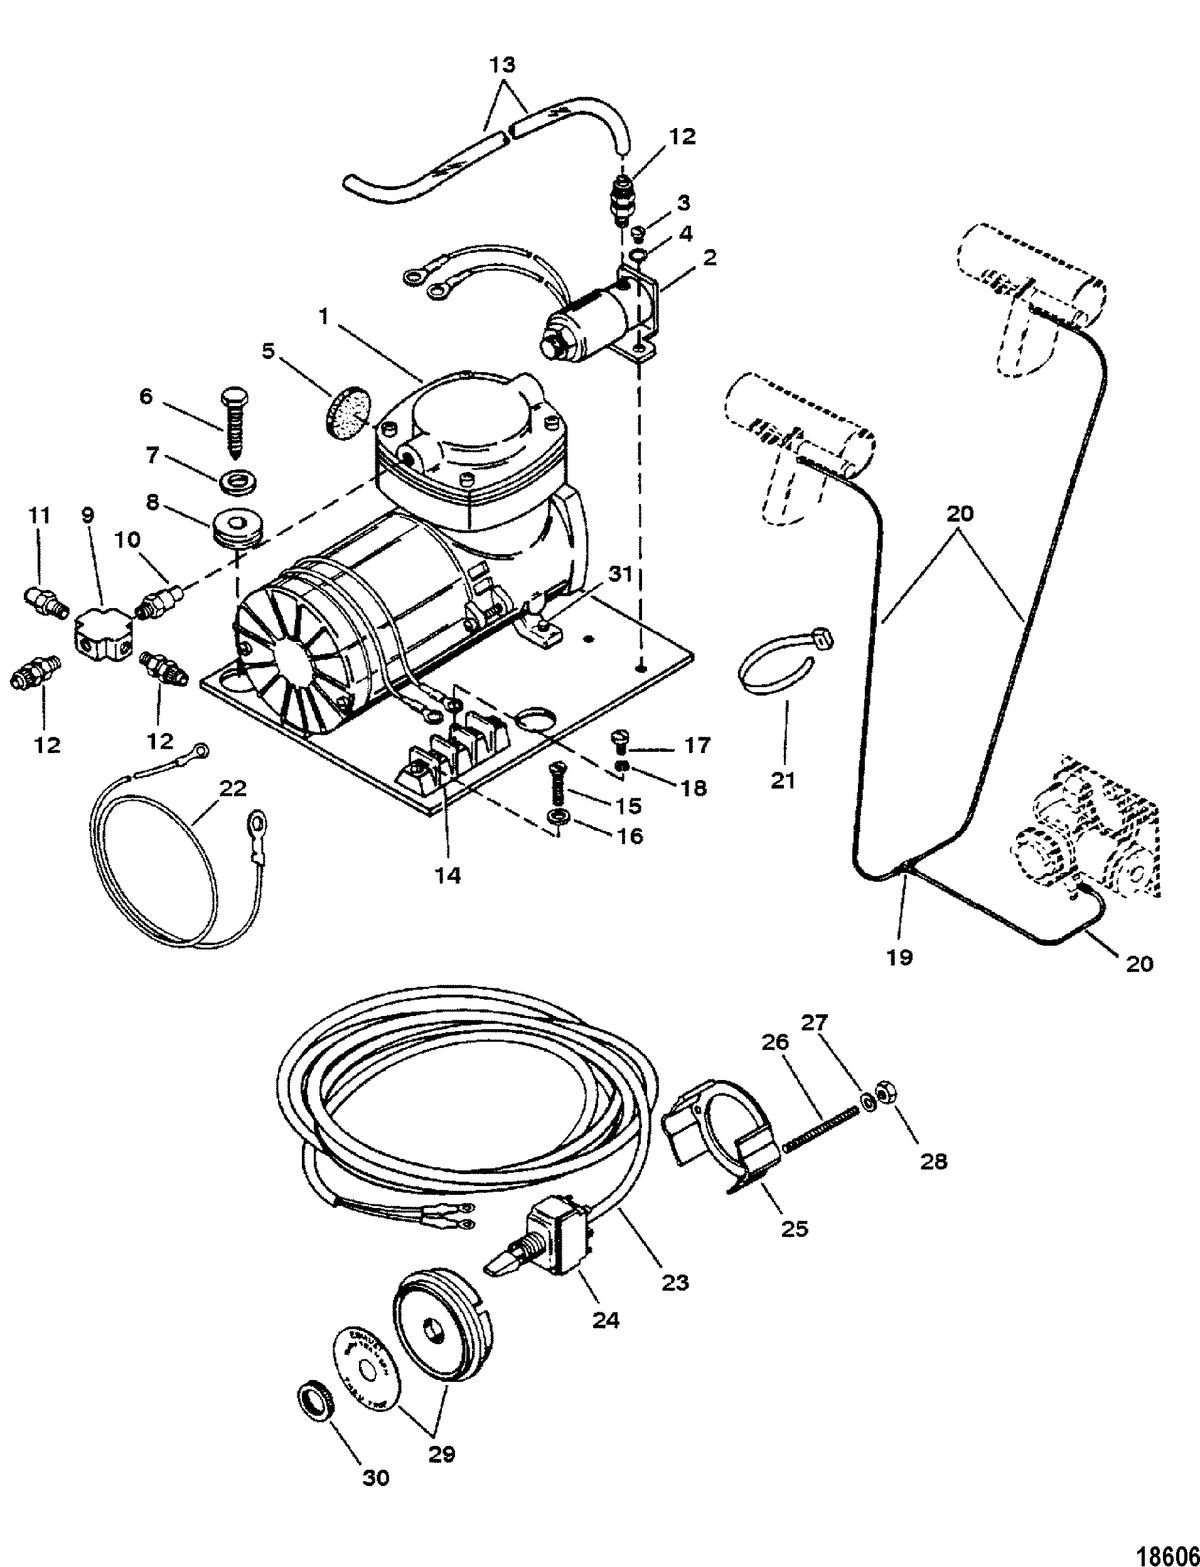 ACCESSORIES EXHAUST/COOLING SYSTEMS AND EXTENSION KITS Pneumatic Air Pump Assembly